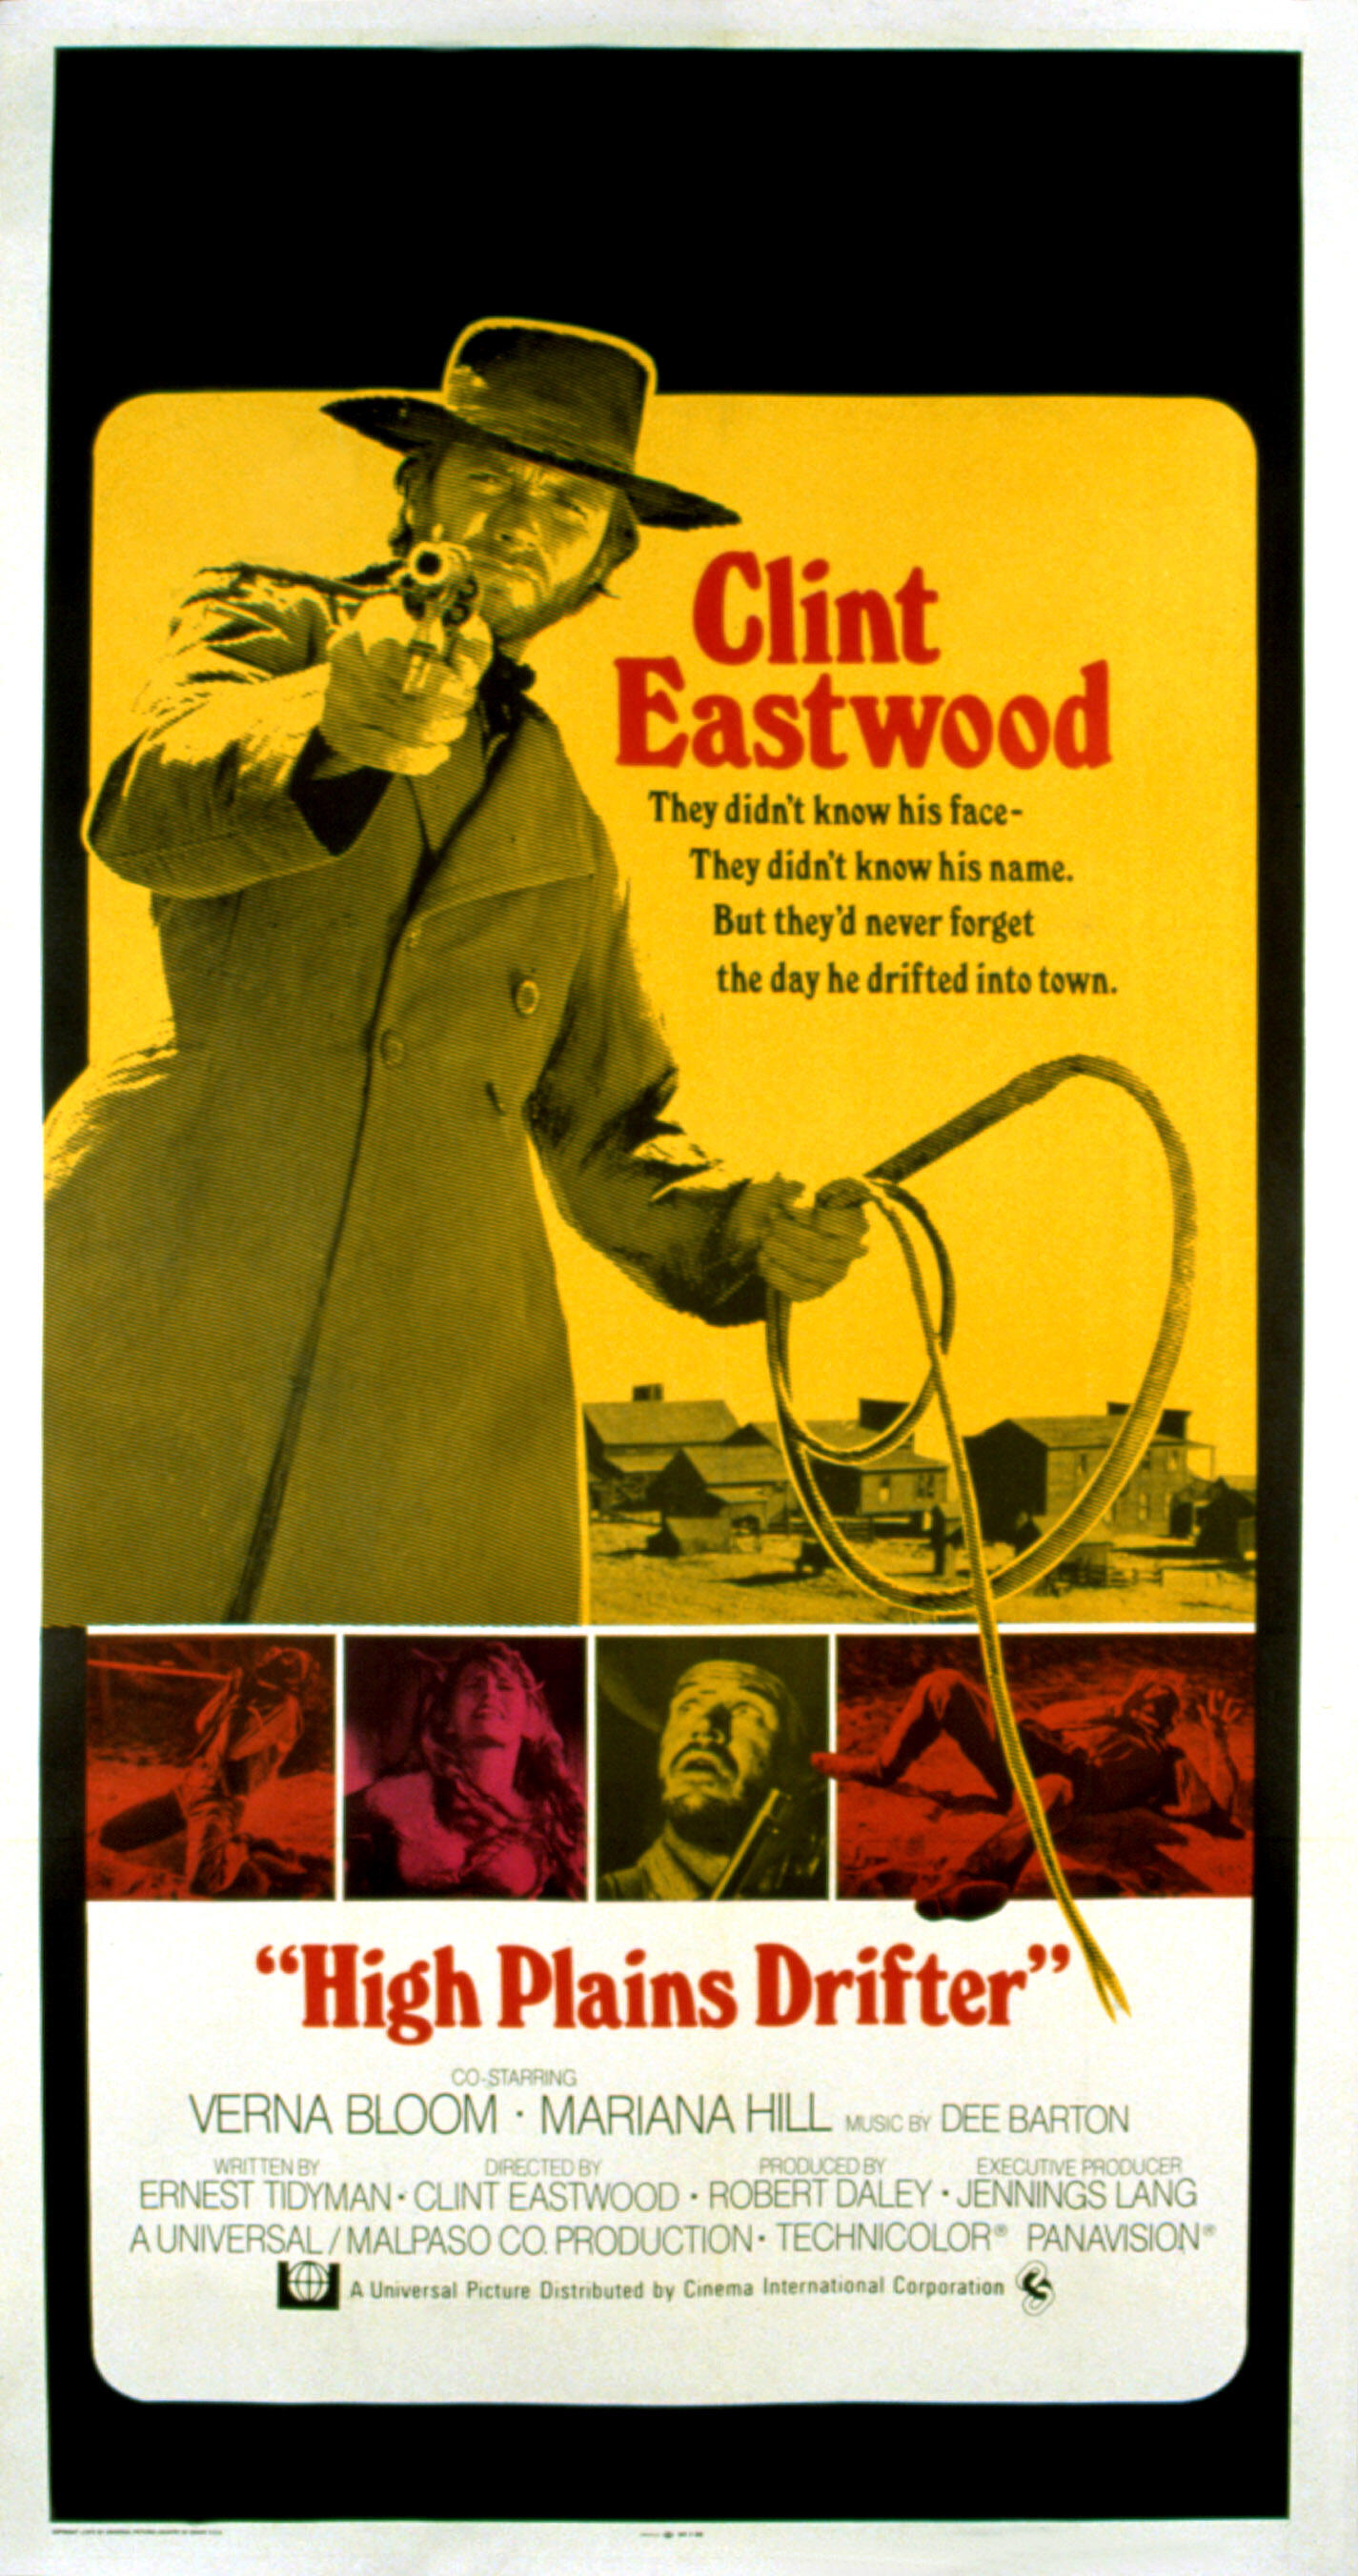 Directed by Dirty Harry: Clint Eastwood's Best Movies | Fandango1425 x 2704